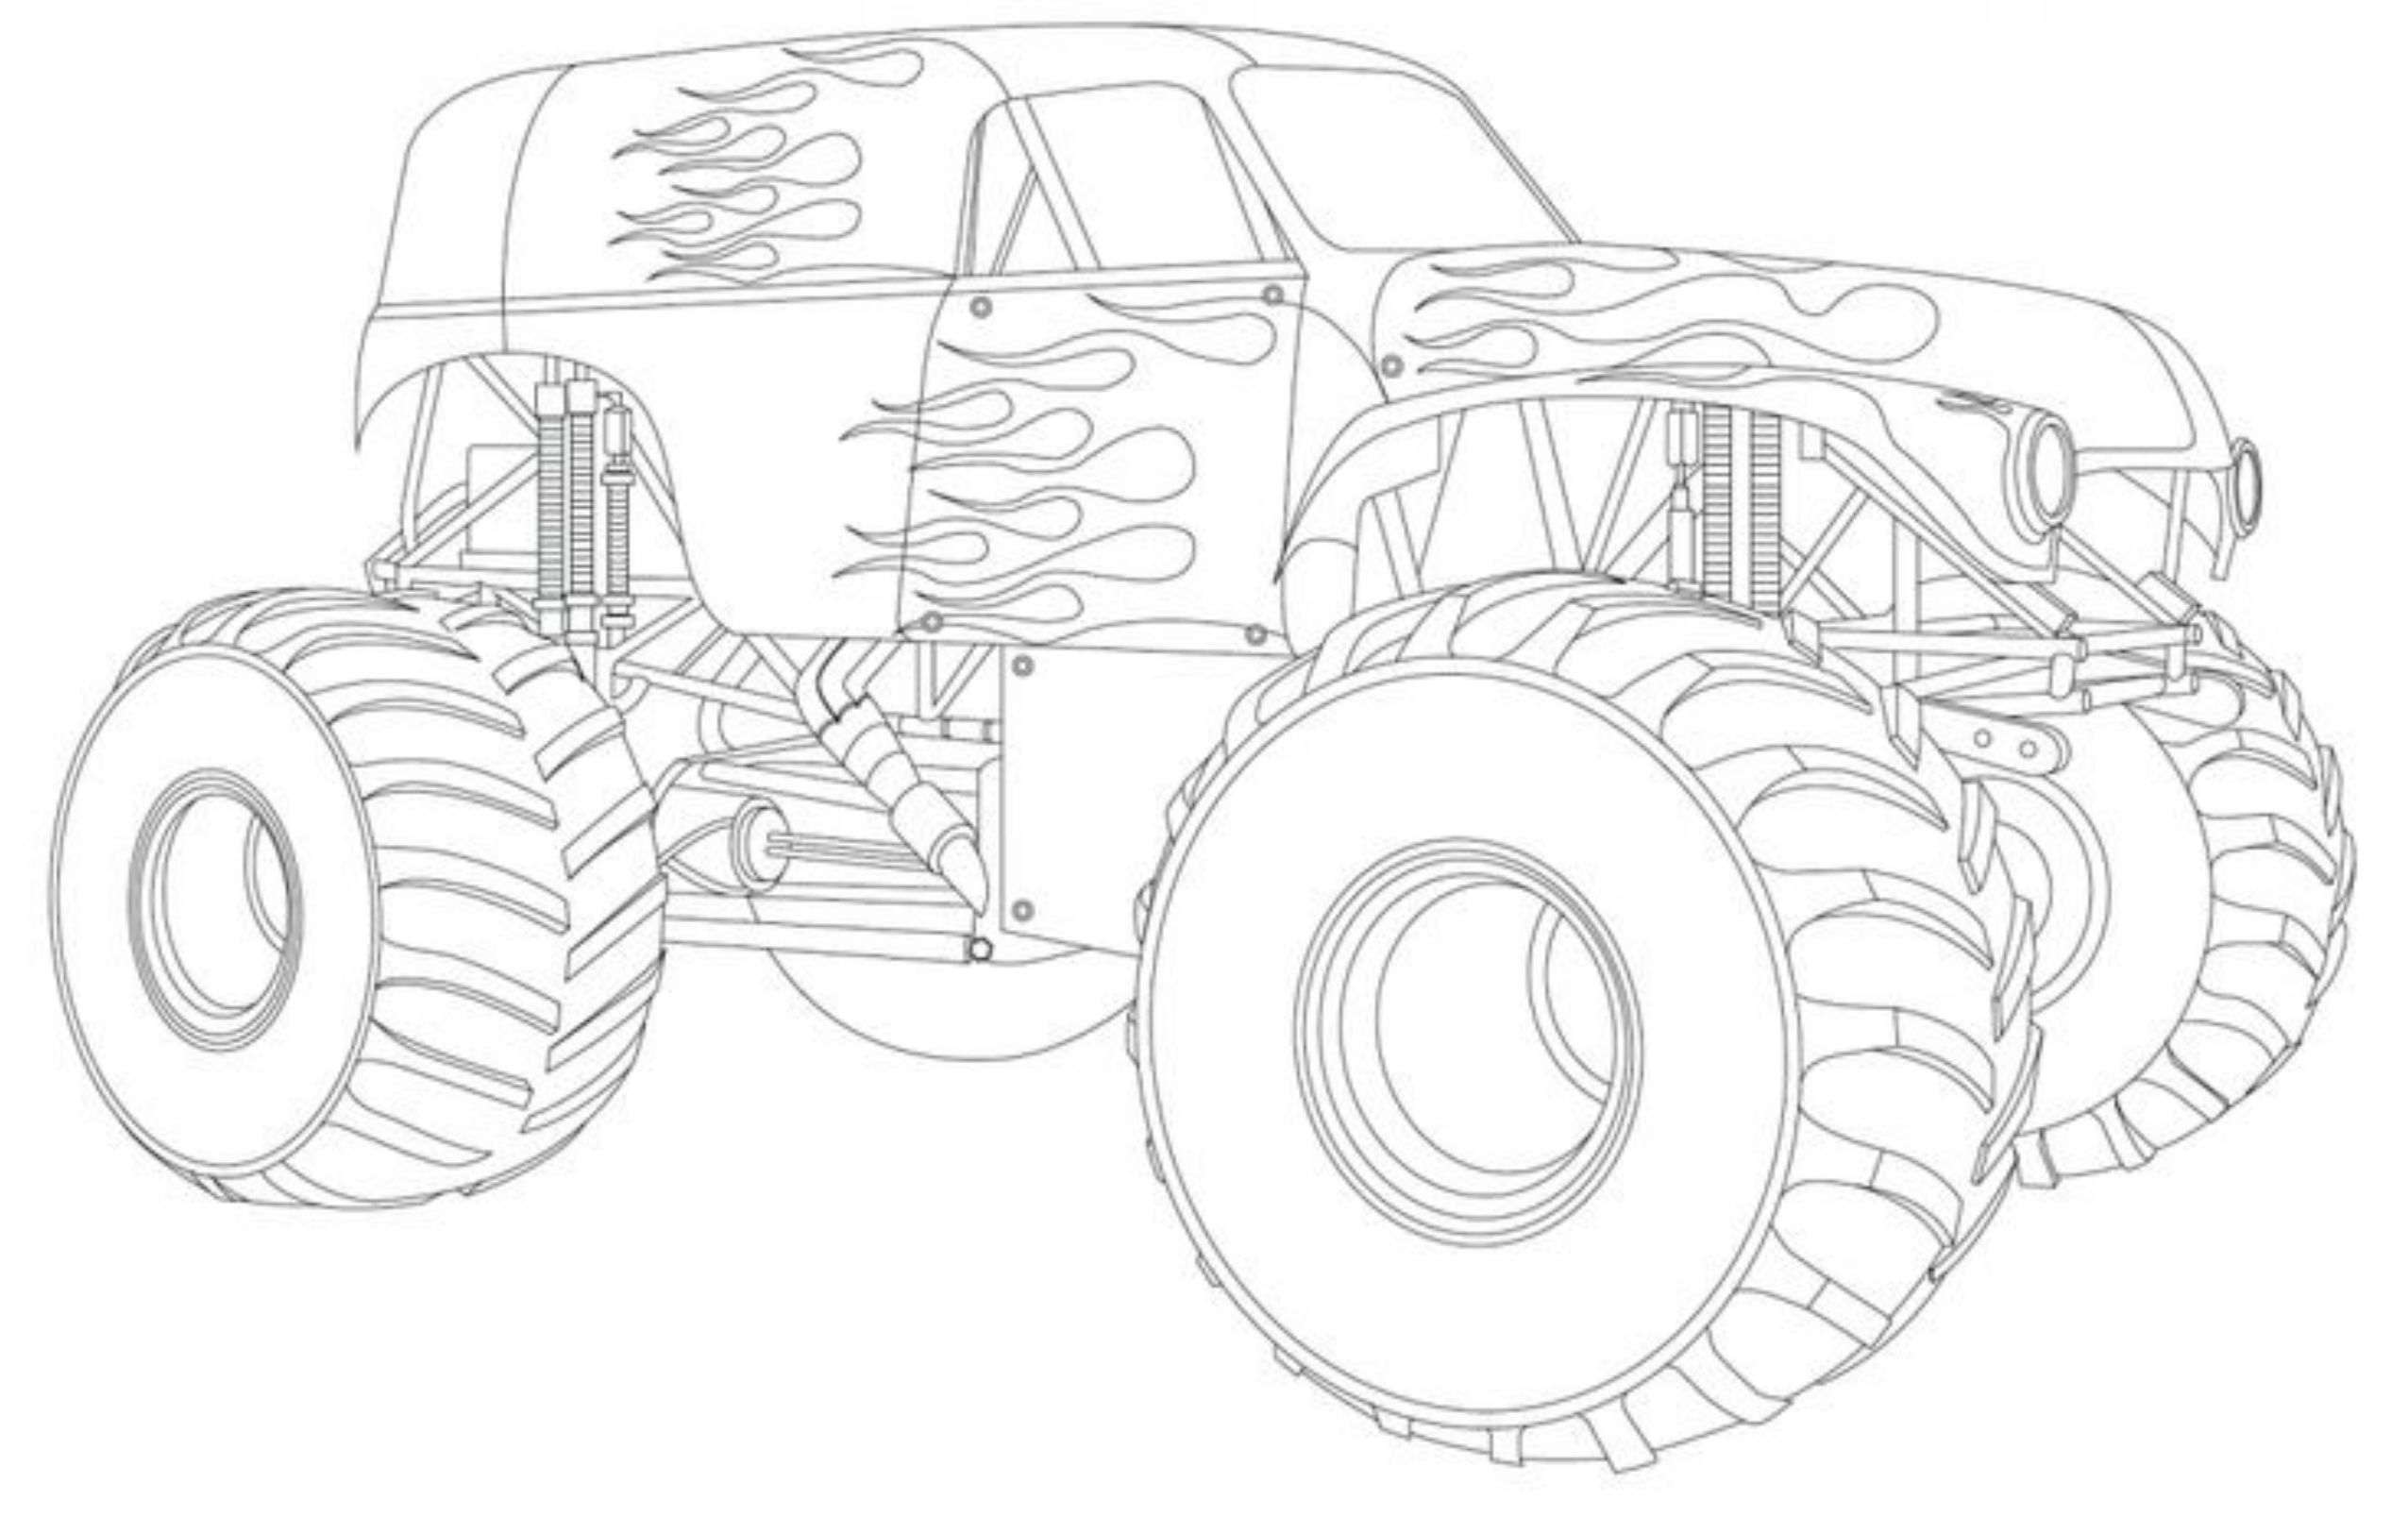 Grave Digger Coloring Pages